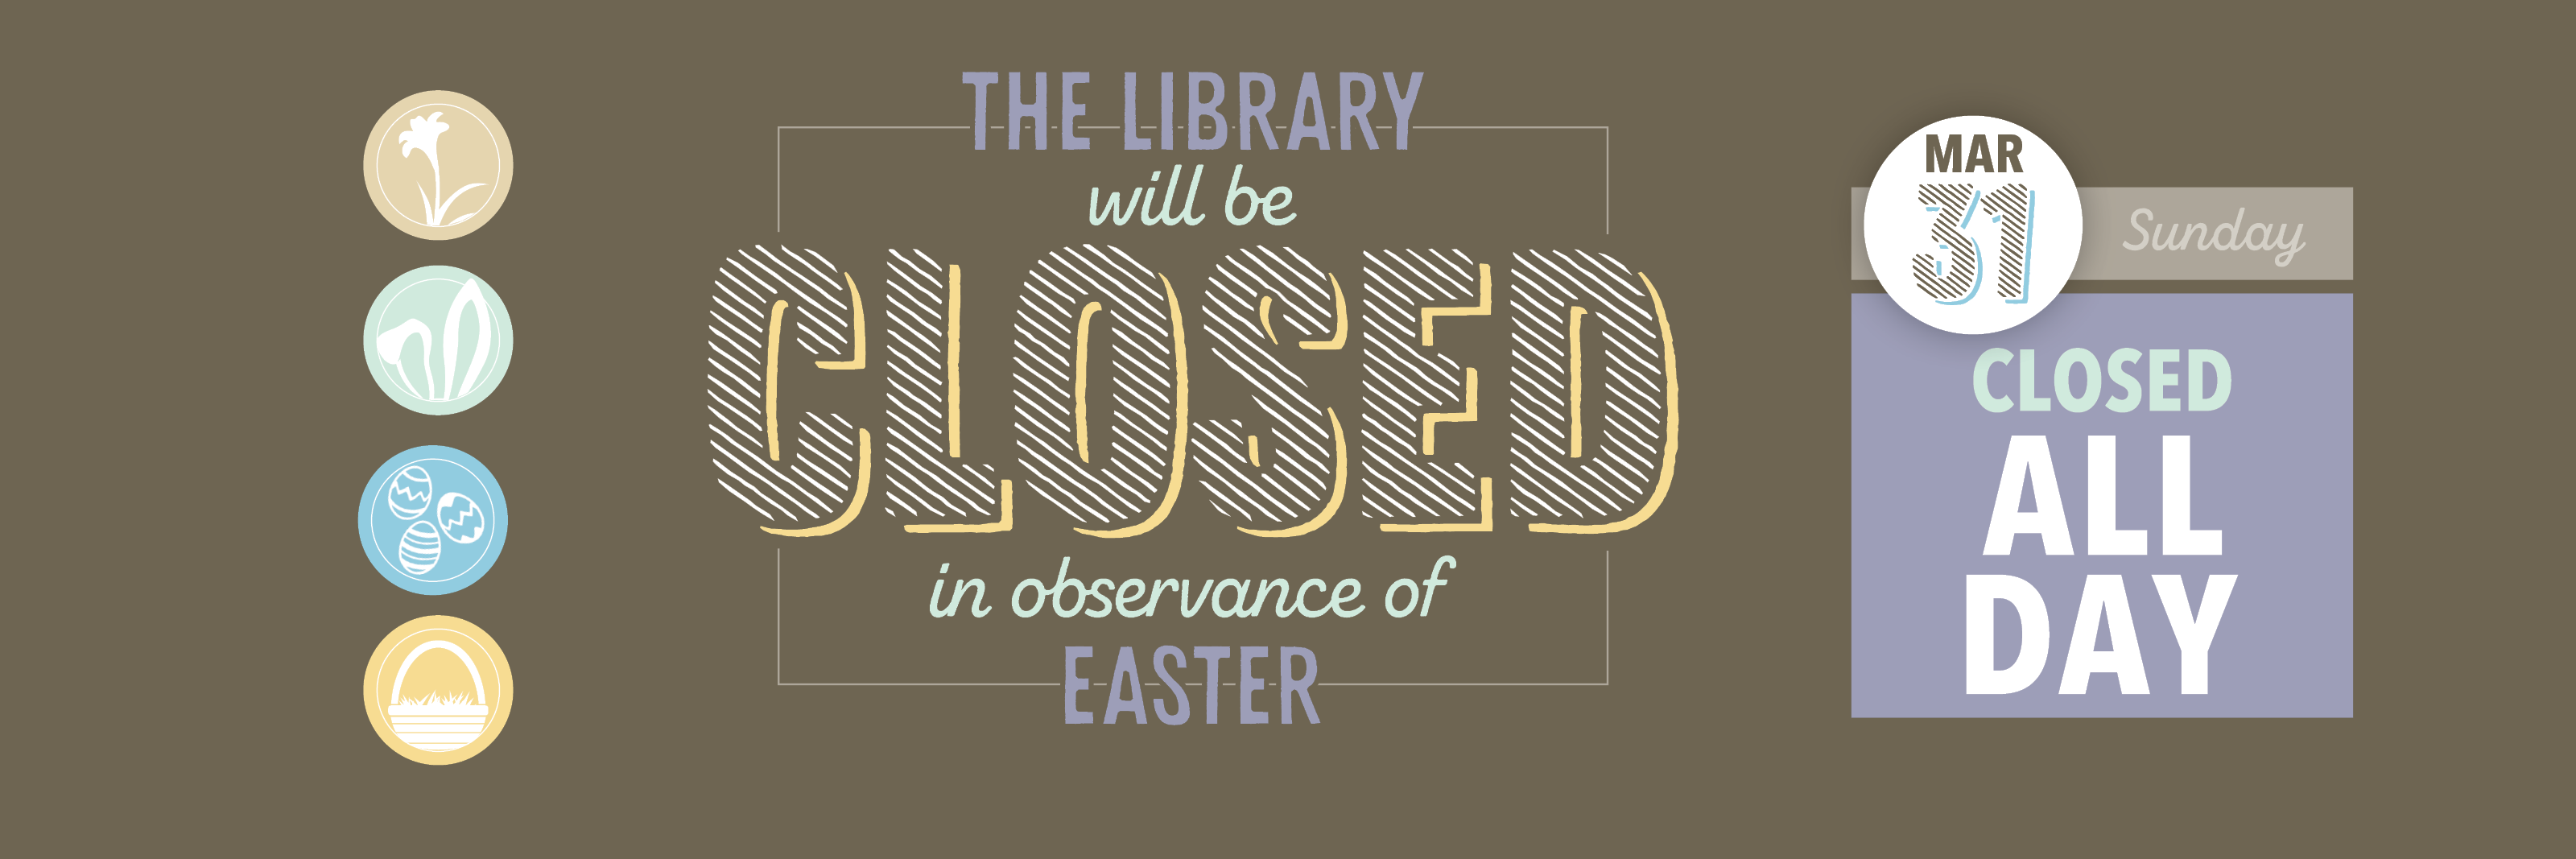 The Library will be closed March 31 for Easter